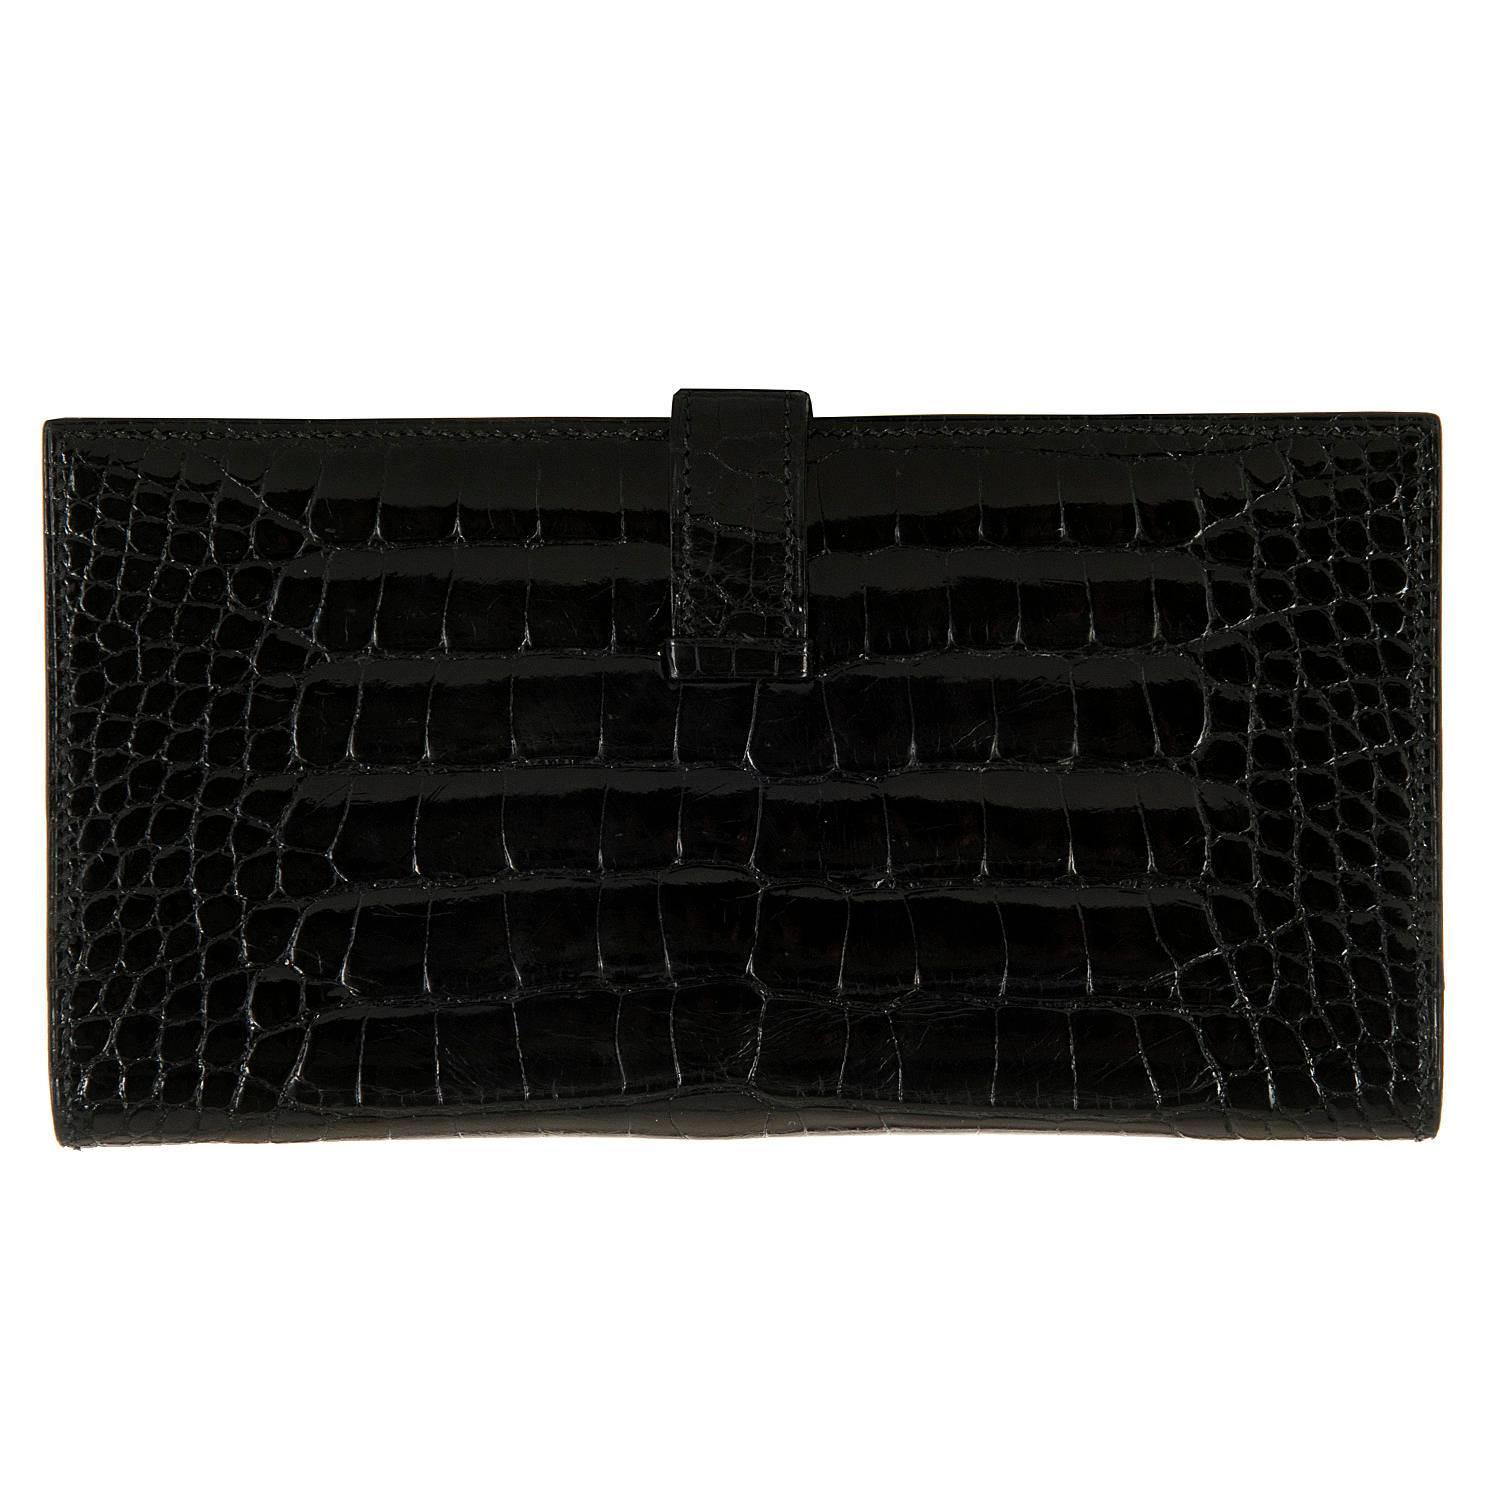 This Fabulous Hermes Shiny Black Crocodile Alligator 'H' Bearn Wallet is a very rare piece indeed. In absolutely pristine condition throughout, the Wallet comes with it's original Hermes box and dust sack. The ultimate luxury accessory, the wallet